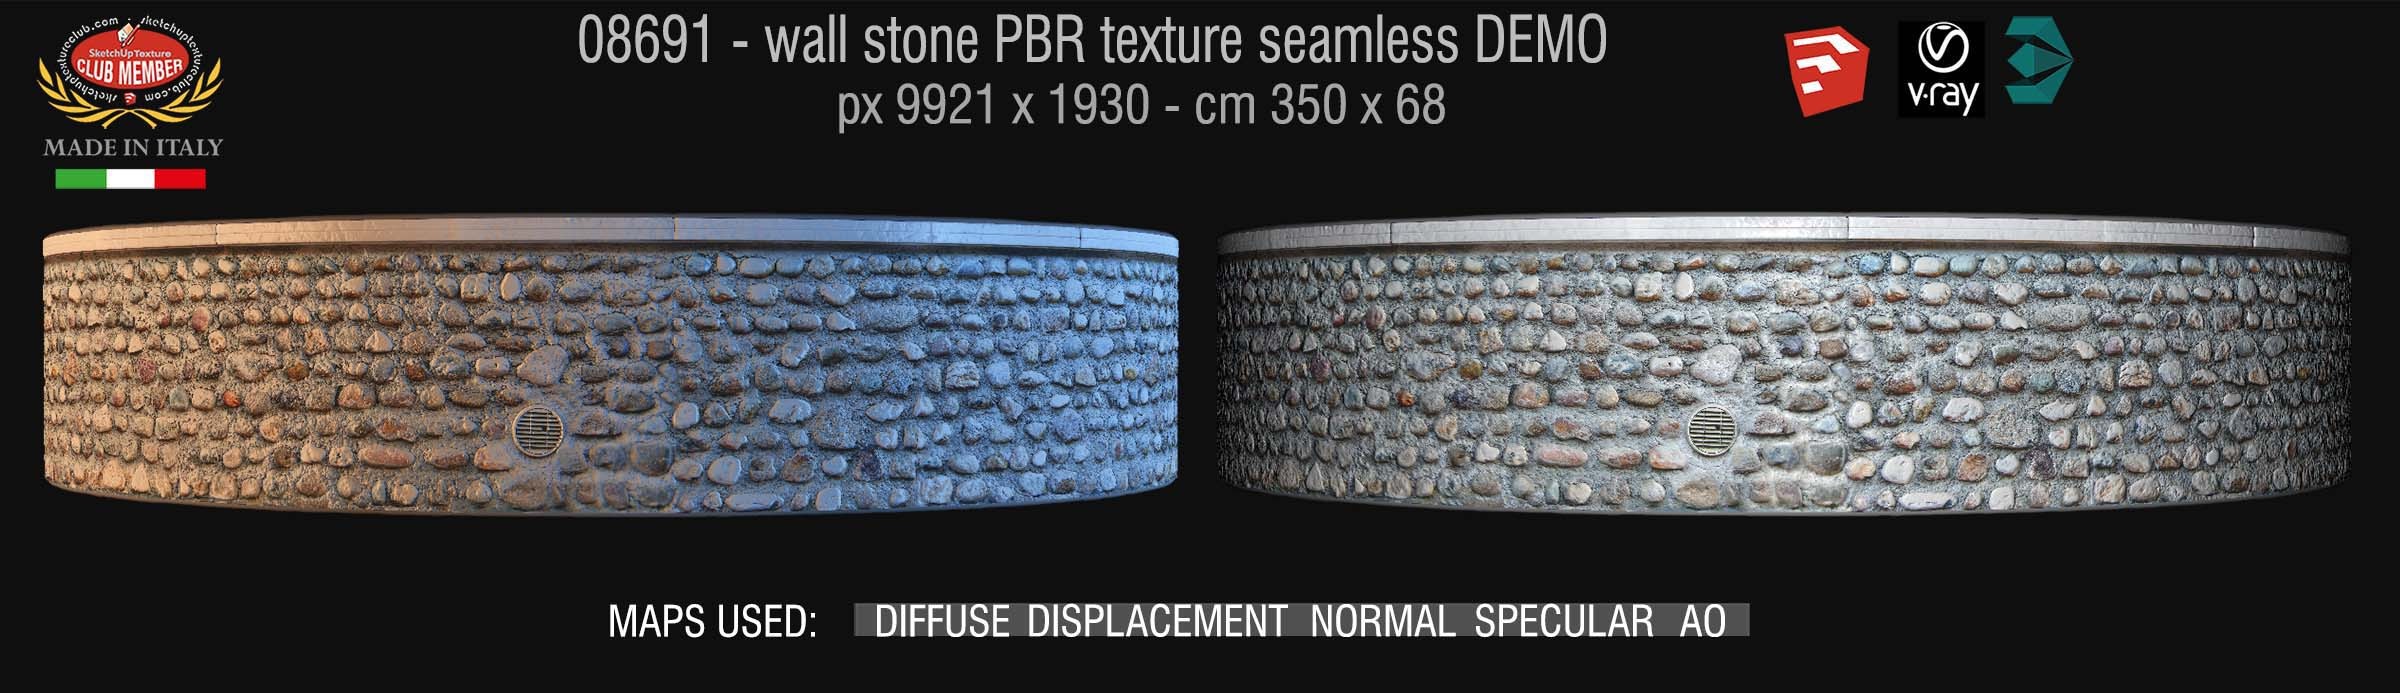 08691 Old wall stone PBR texture seamless DEMO